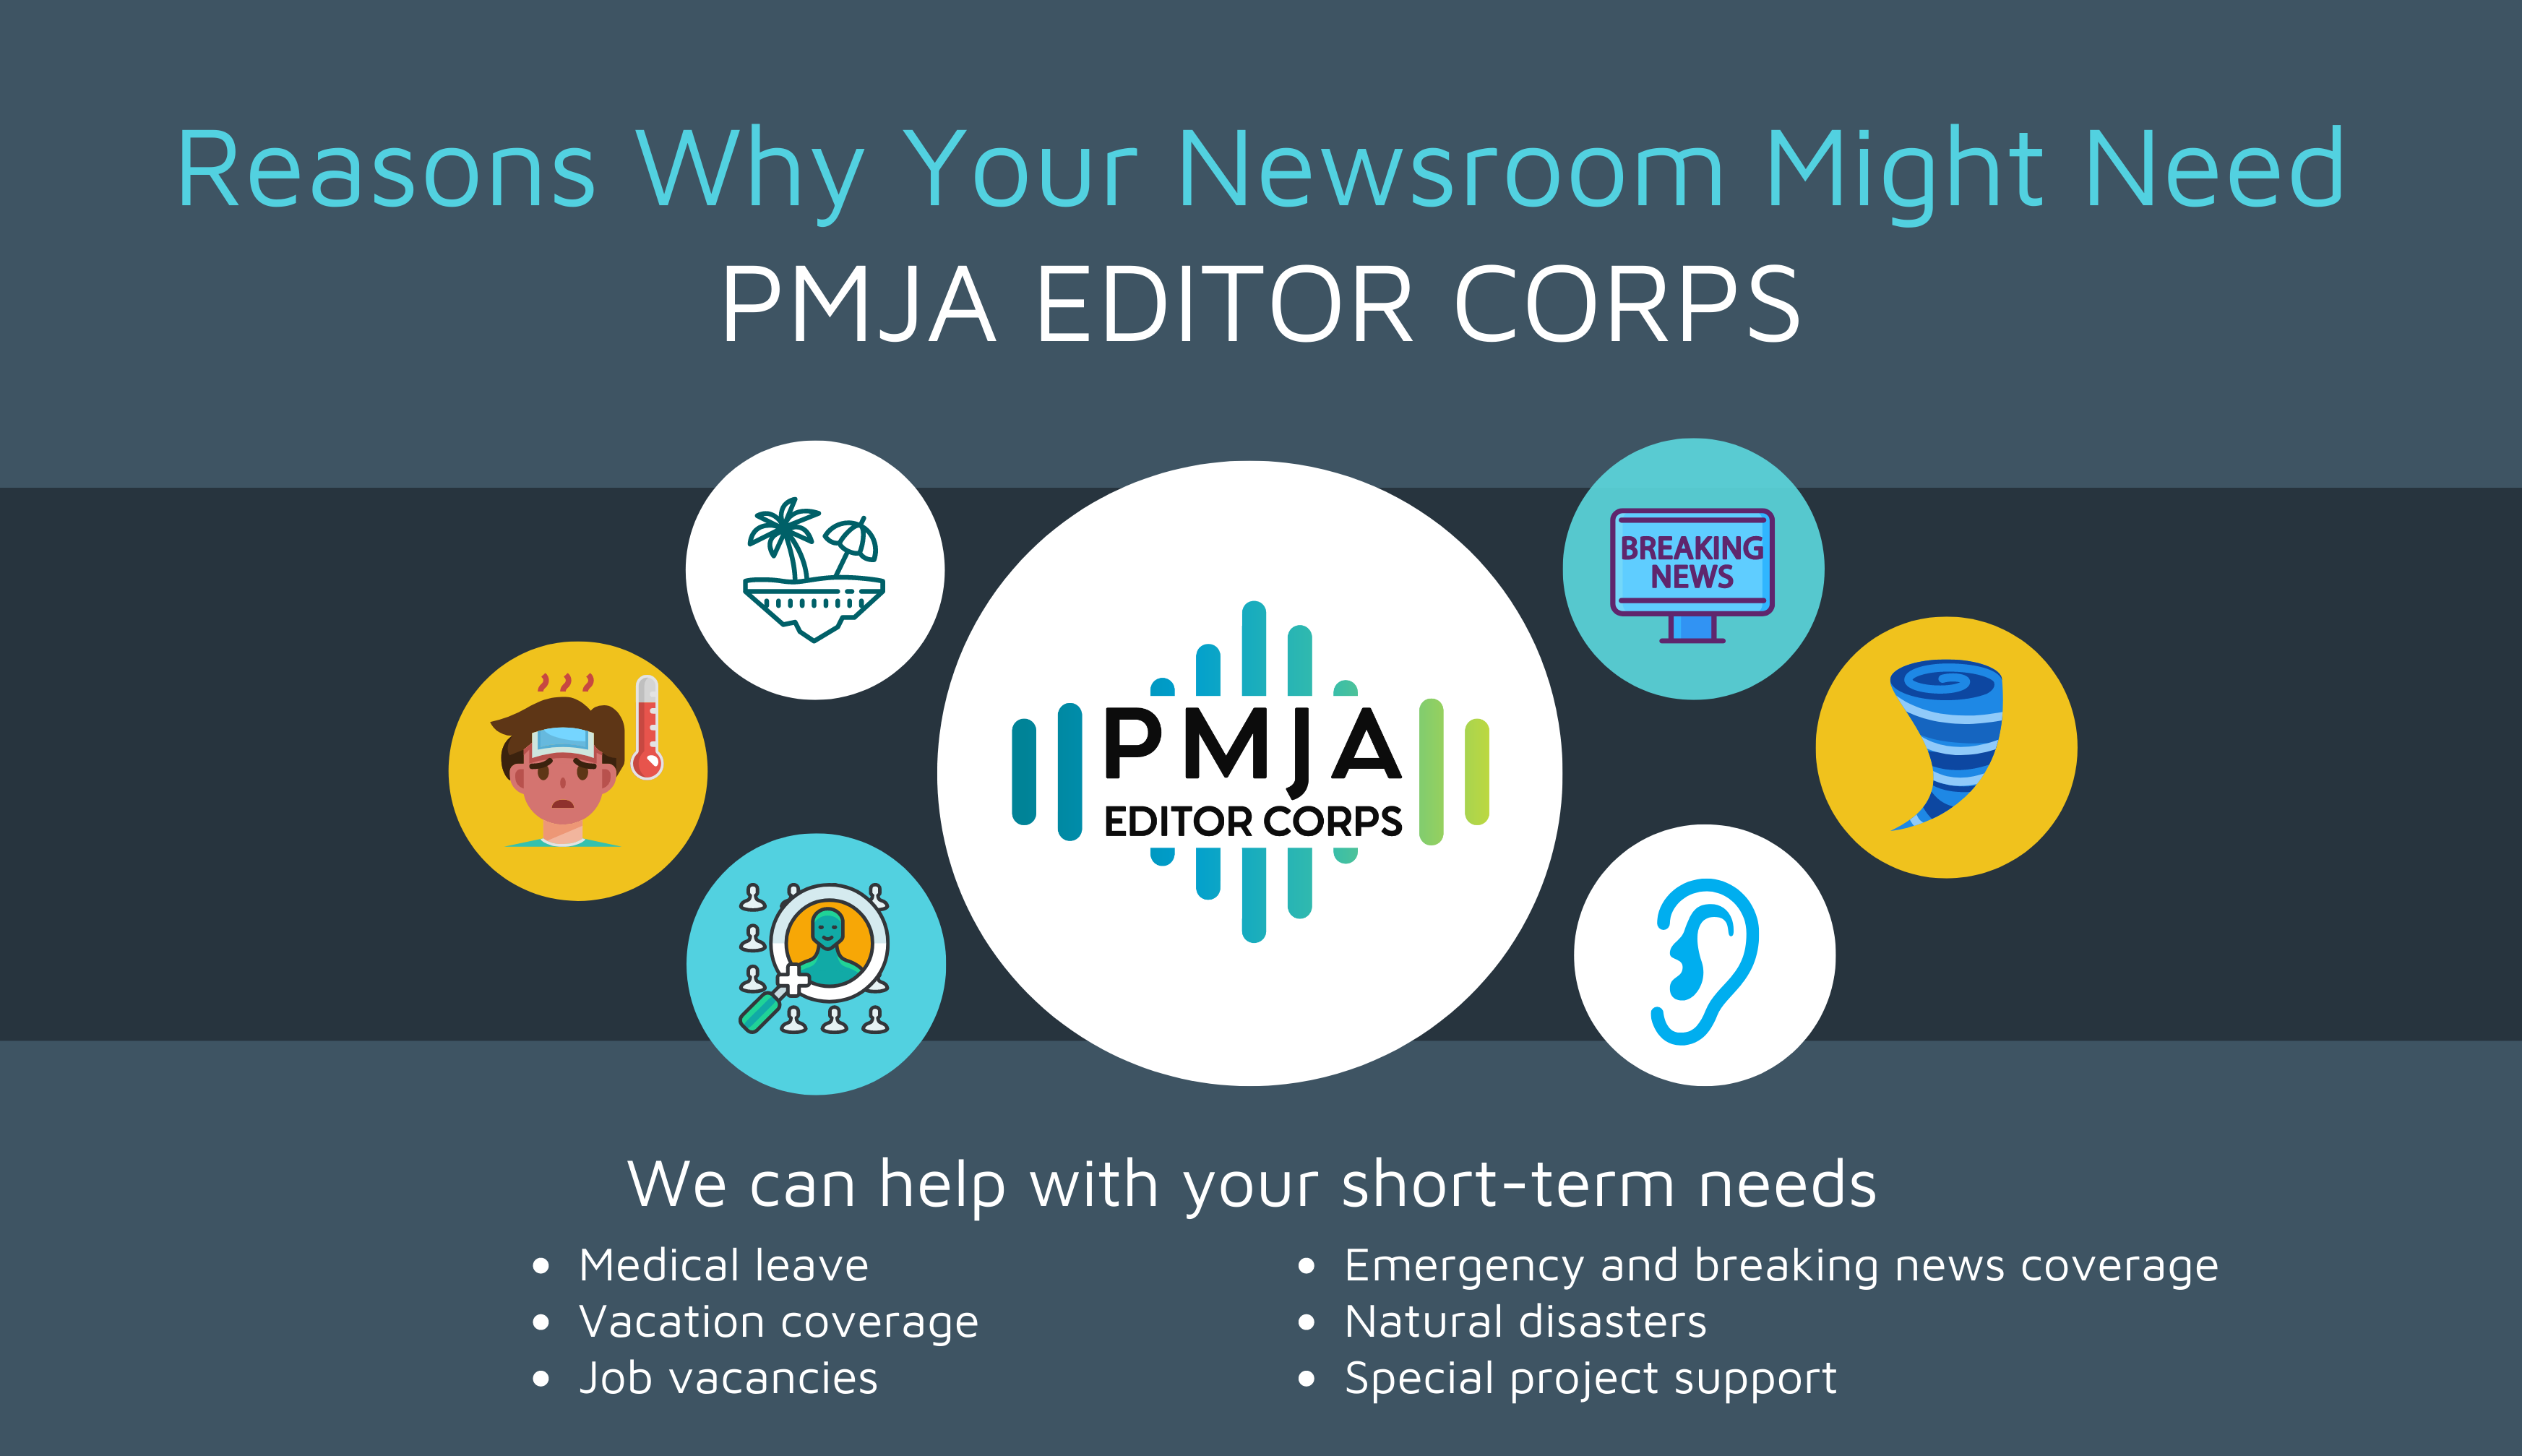 Reasons you might need Editor Corps: medical leave, vacations, job openings, breaking news, emergencies, special coverage, national disasters